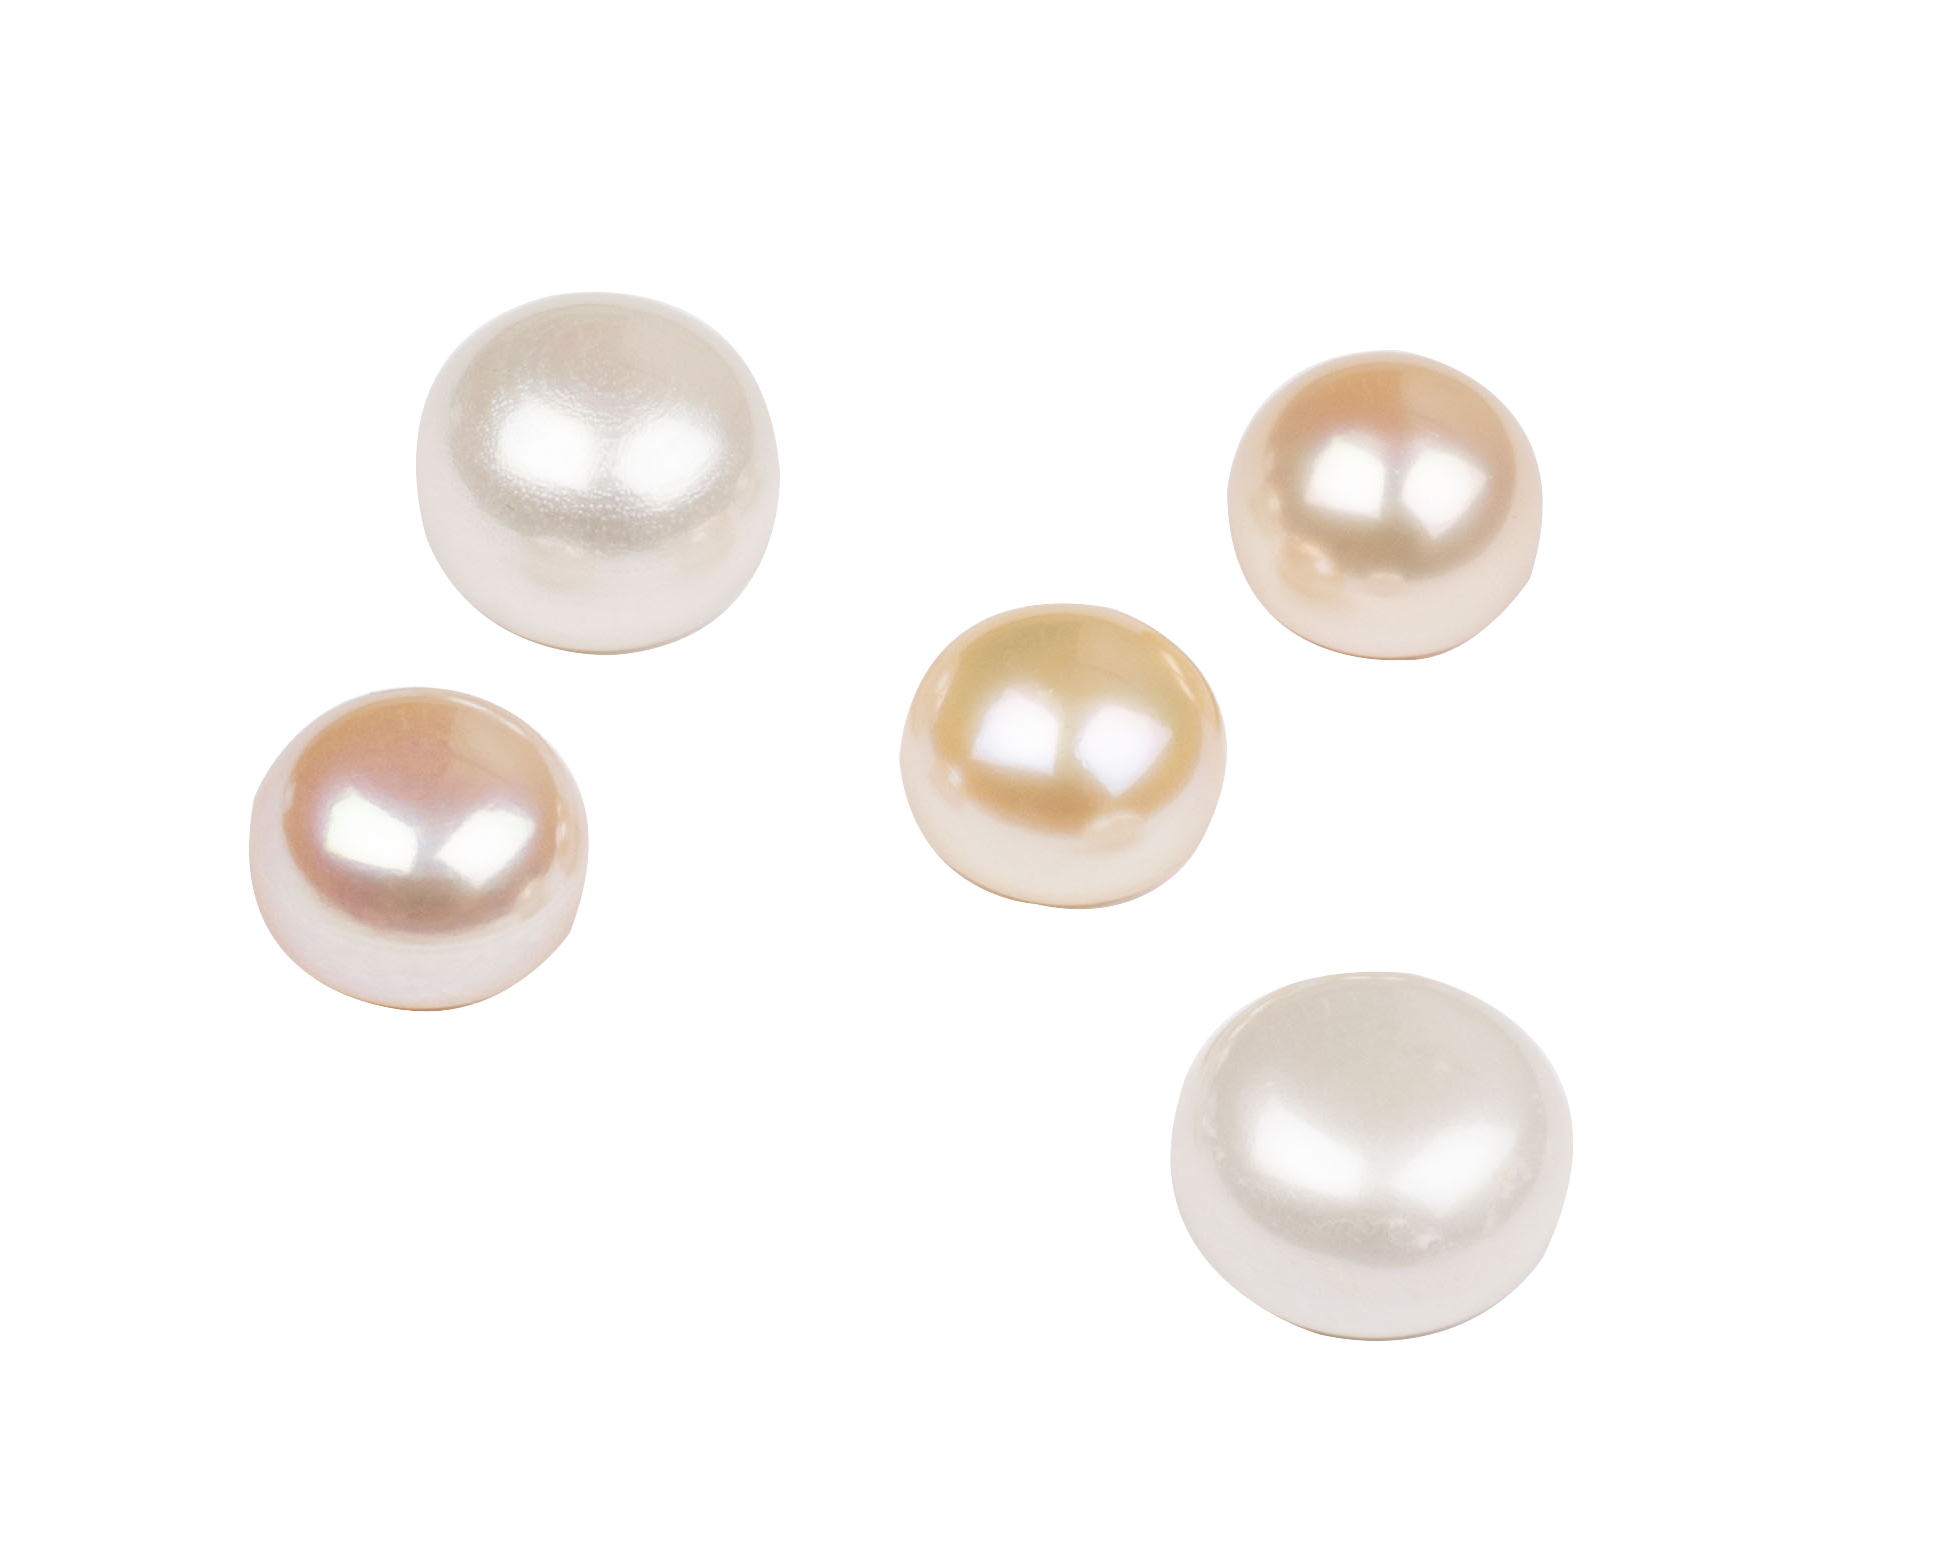 Pearls (moti) on a white background